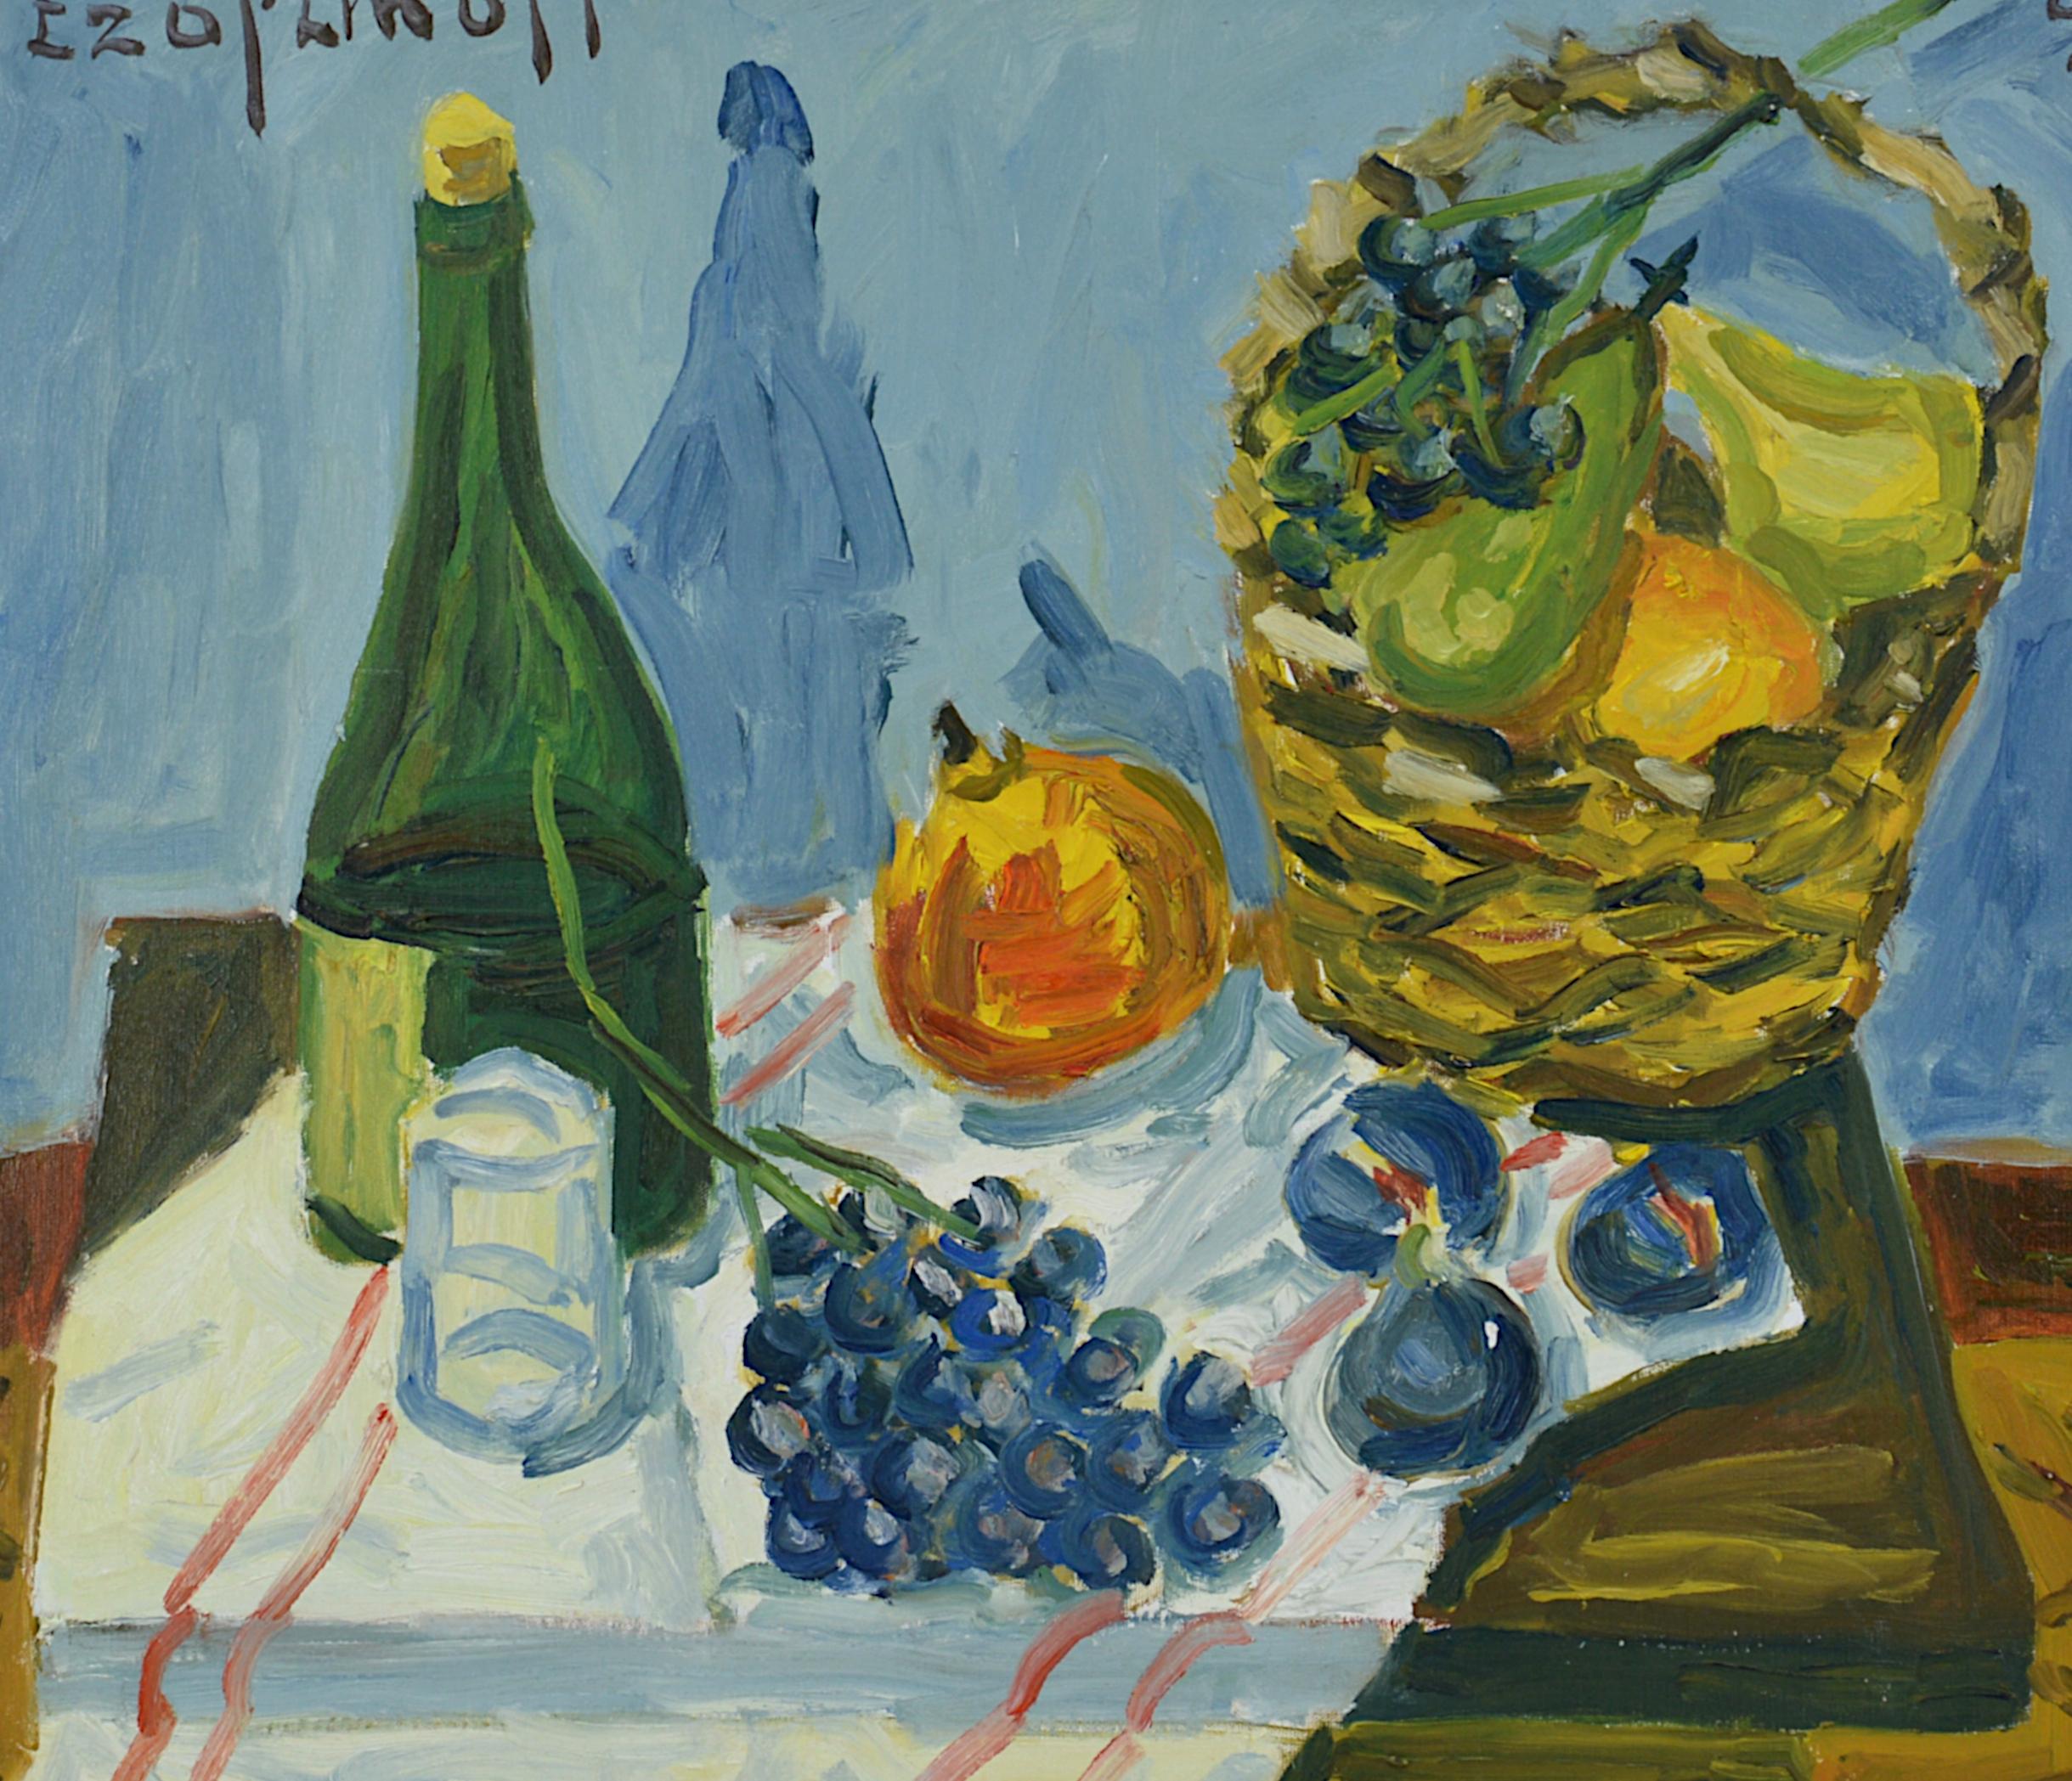 Pierre TROFIMOFF, Still Life with Basket, Oil on Canvas, 1992 - French School Painting by Pierre Trofimoff